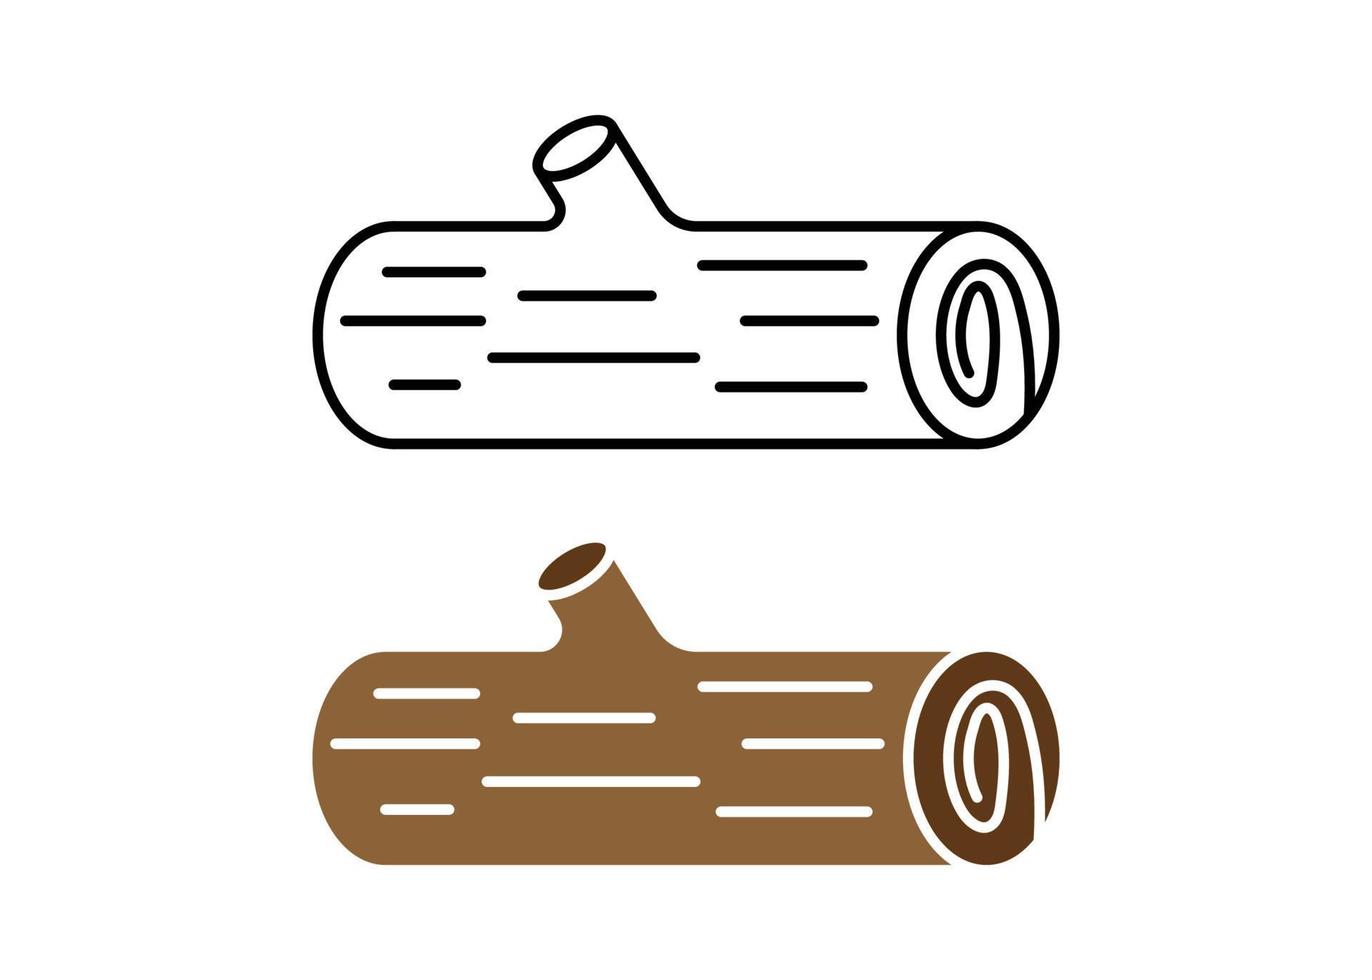 Wood log icon design template clipart illustration vector